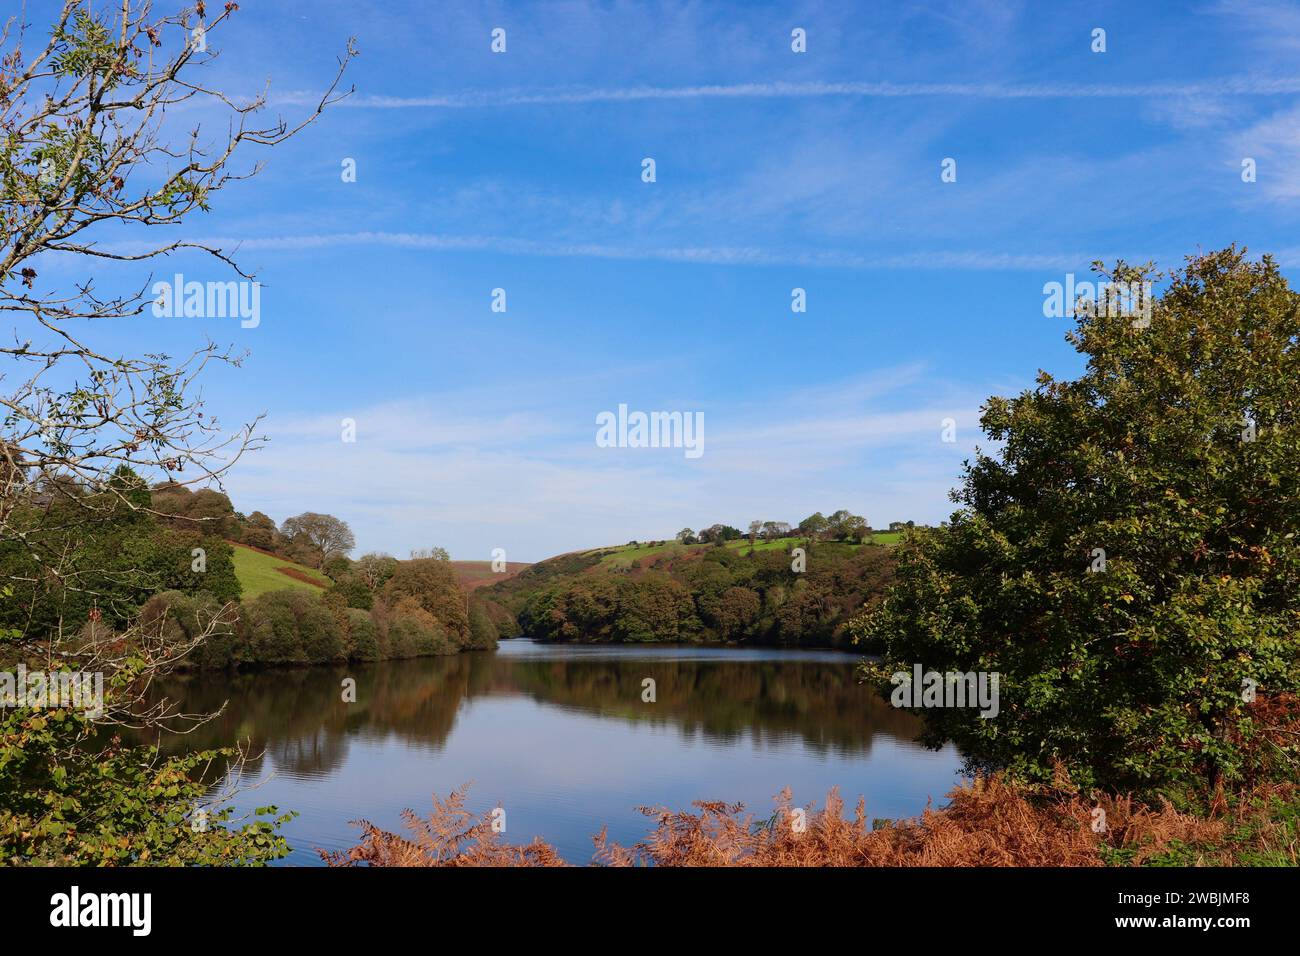 A reservoir and its reflection during the autumn season surrounded by greenery Stock Photo